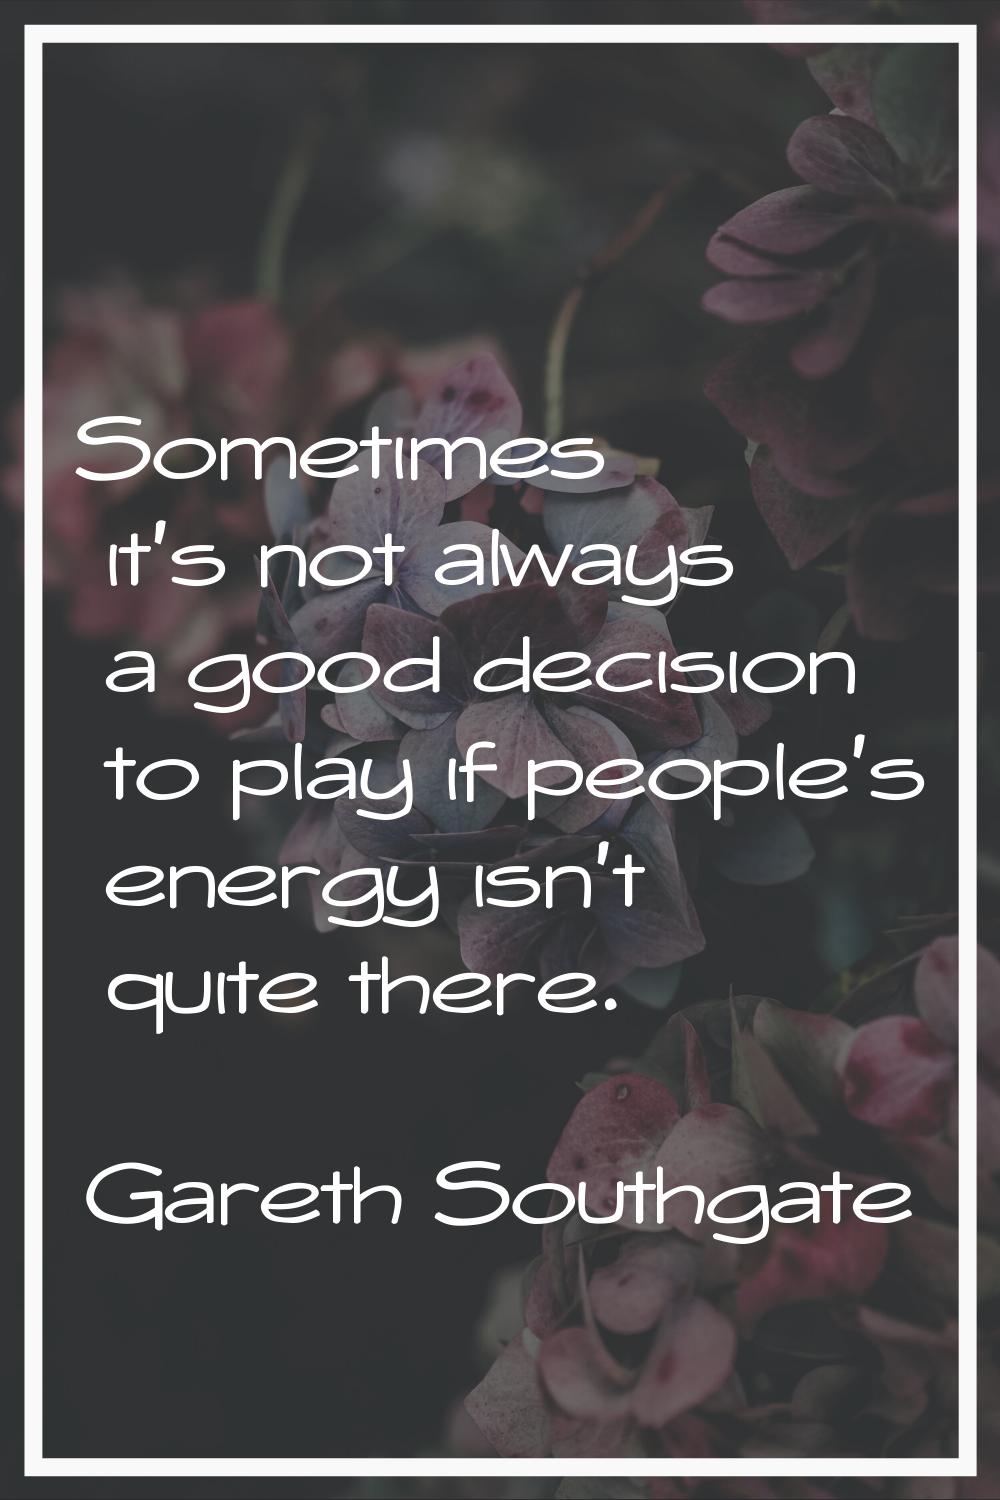 Sometimes it's not always a good decision to play if people's energy isn't quite there.